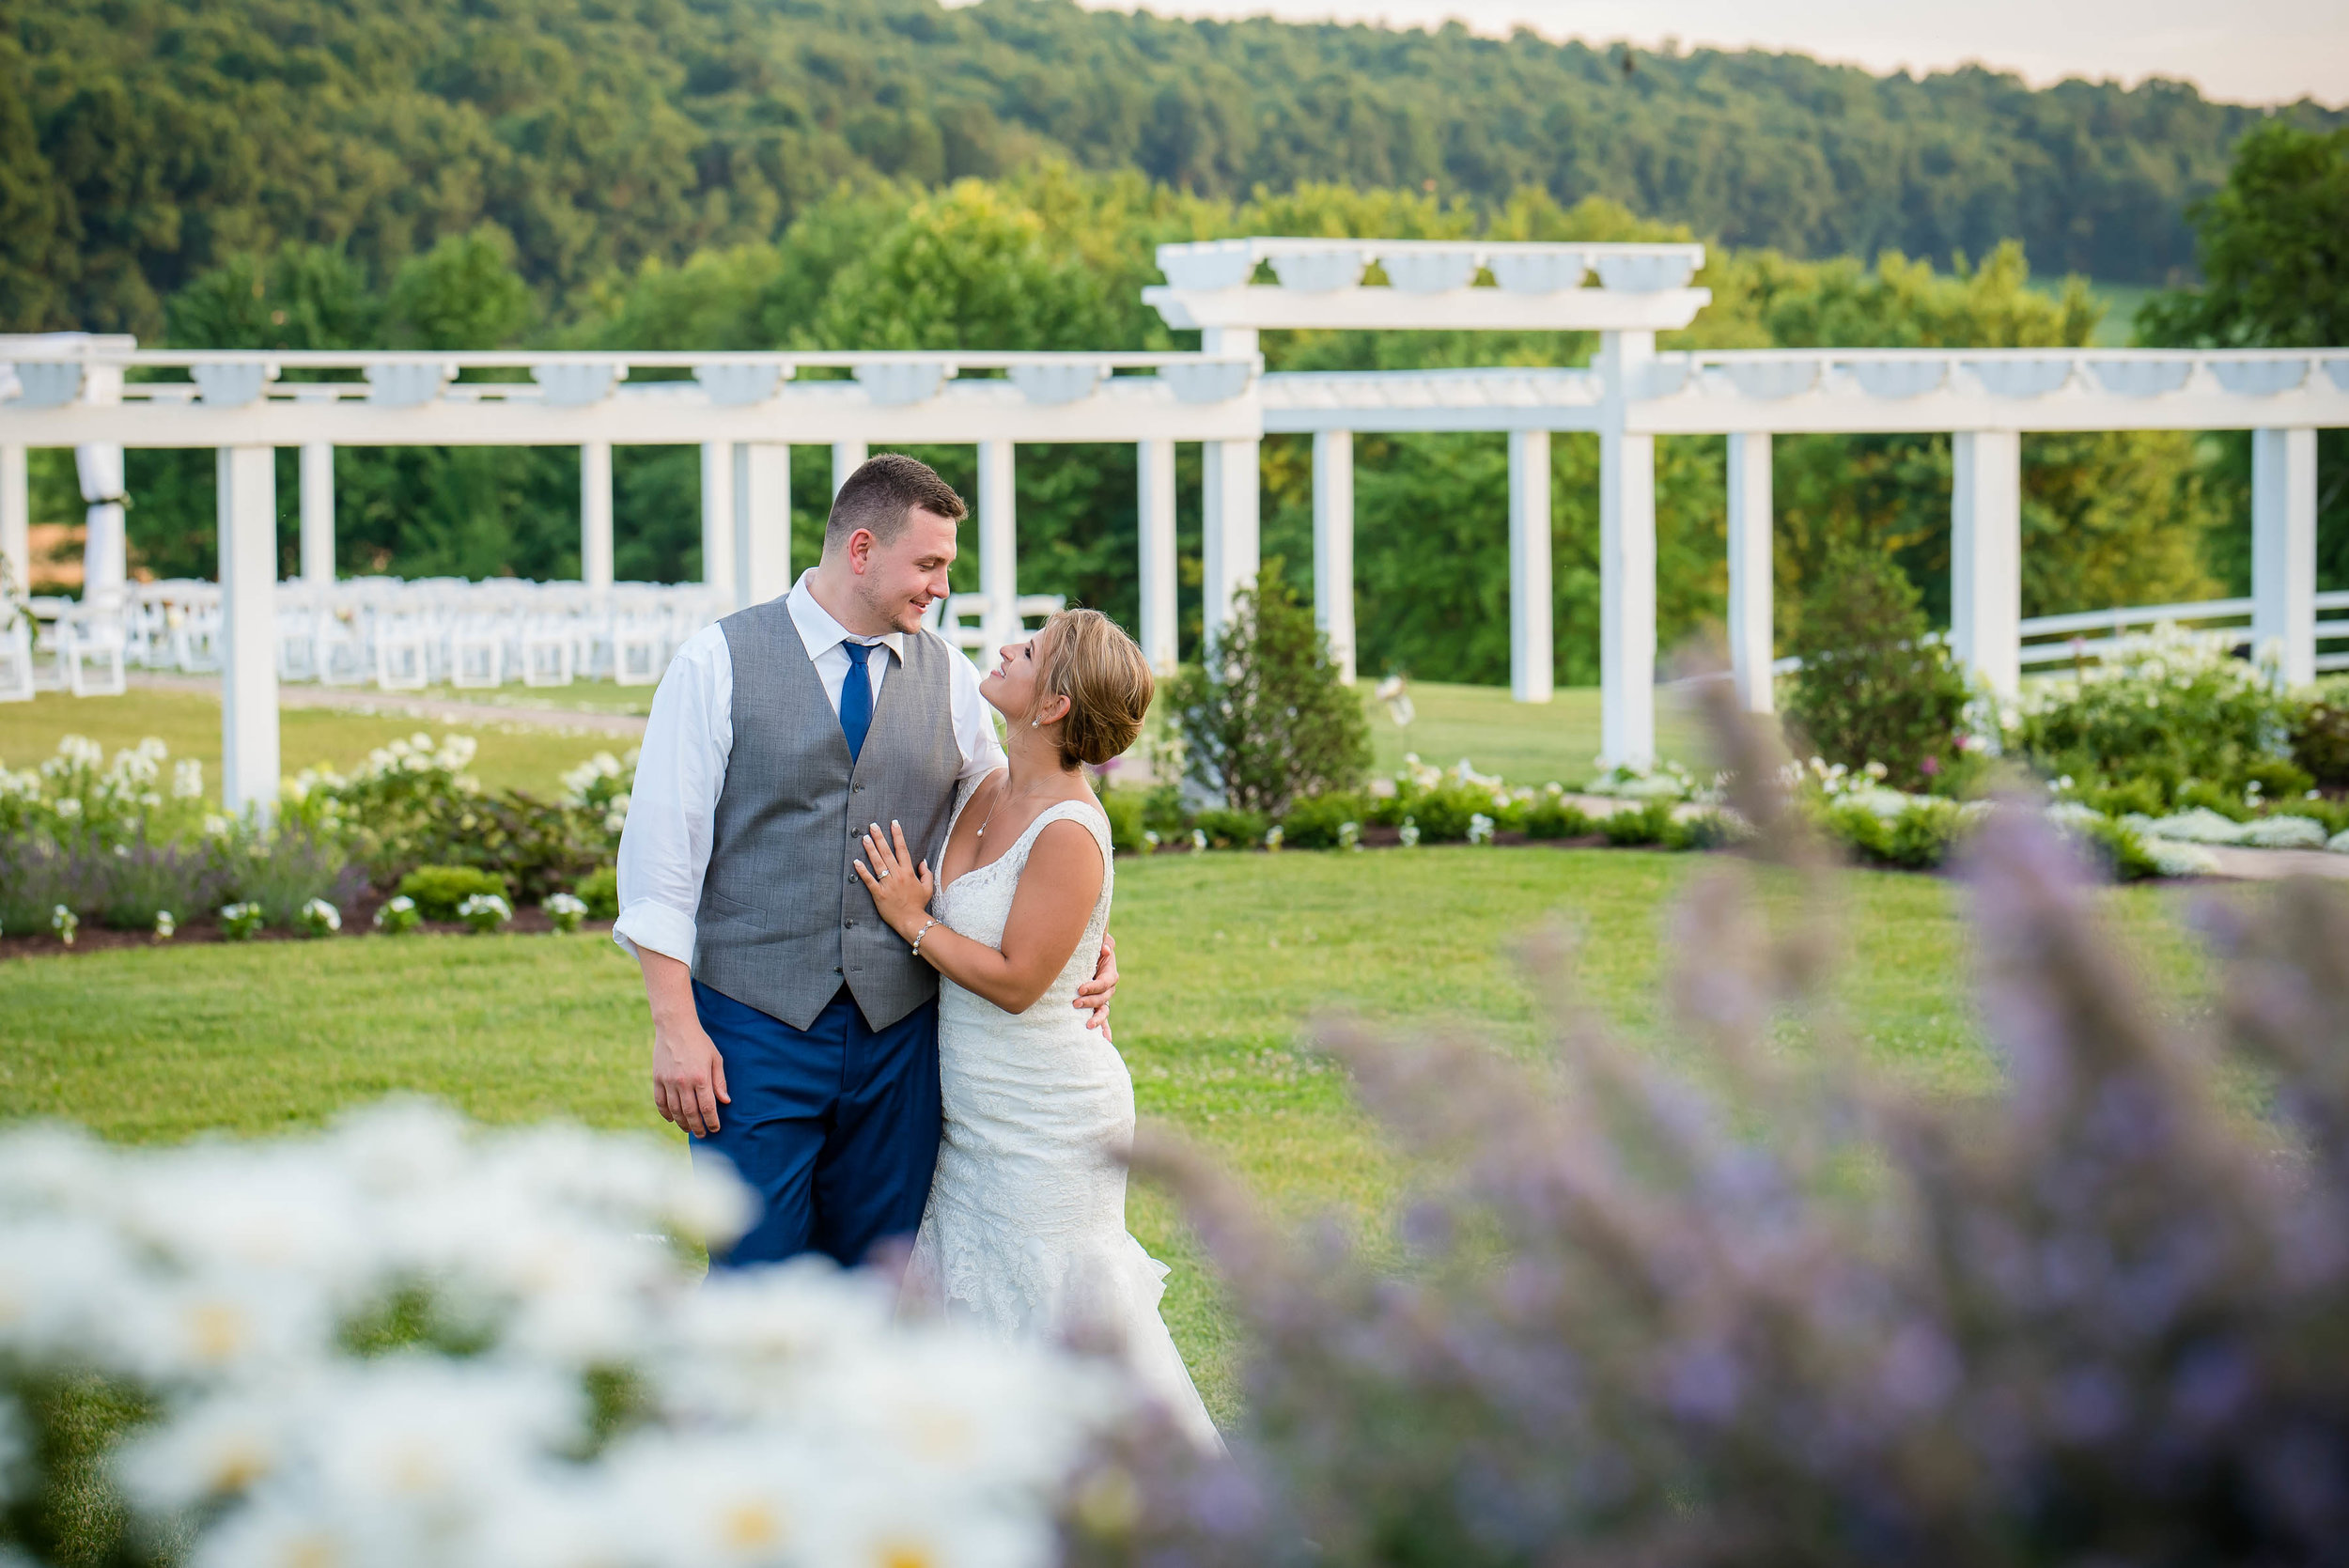 bride and groom with pergola in back.jpg